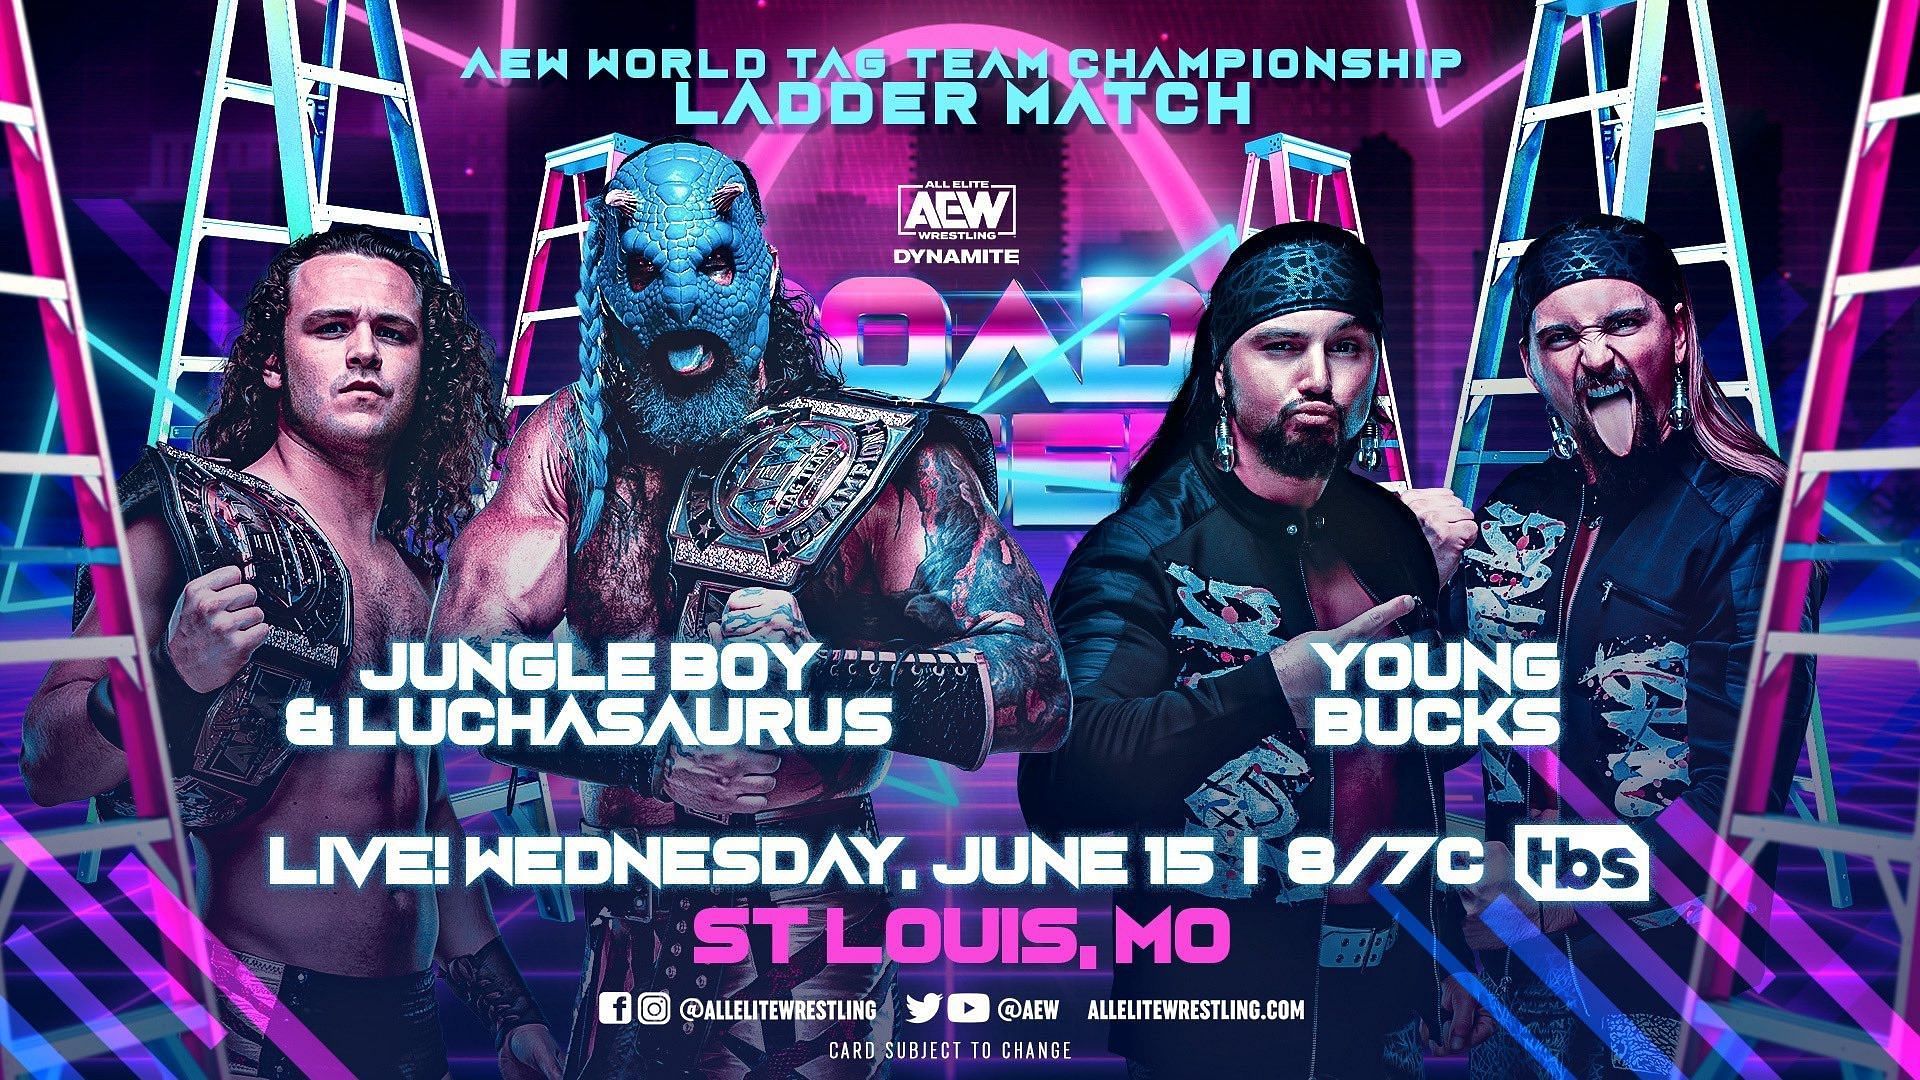 The Young Bucks captured the AEW Tag Team Championship